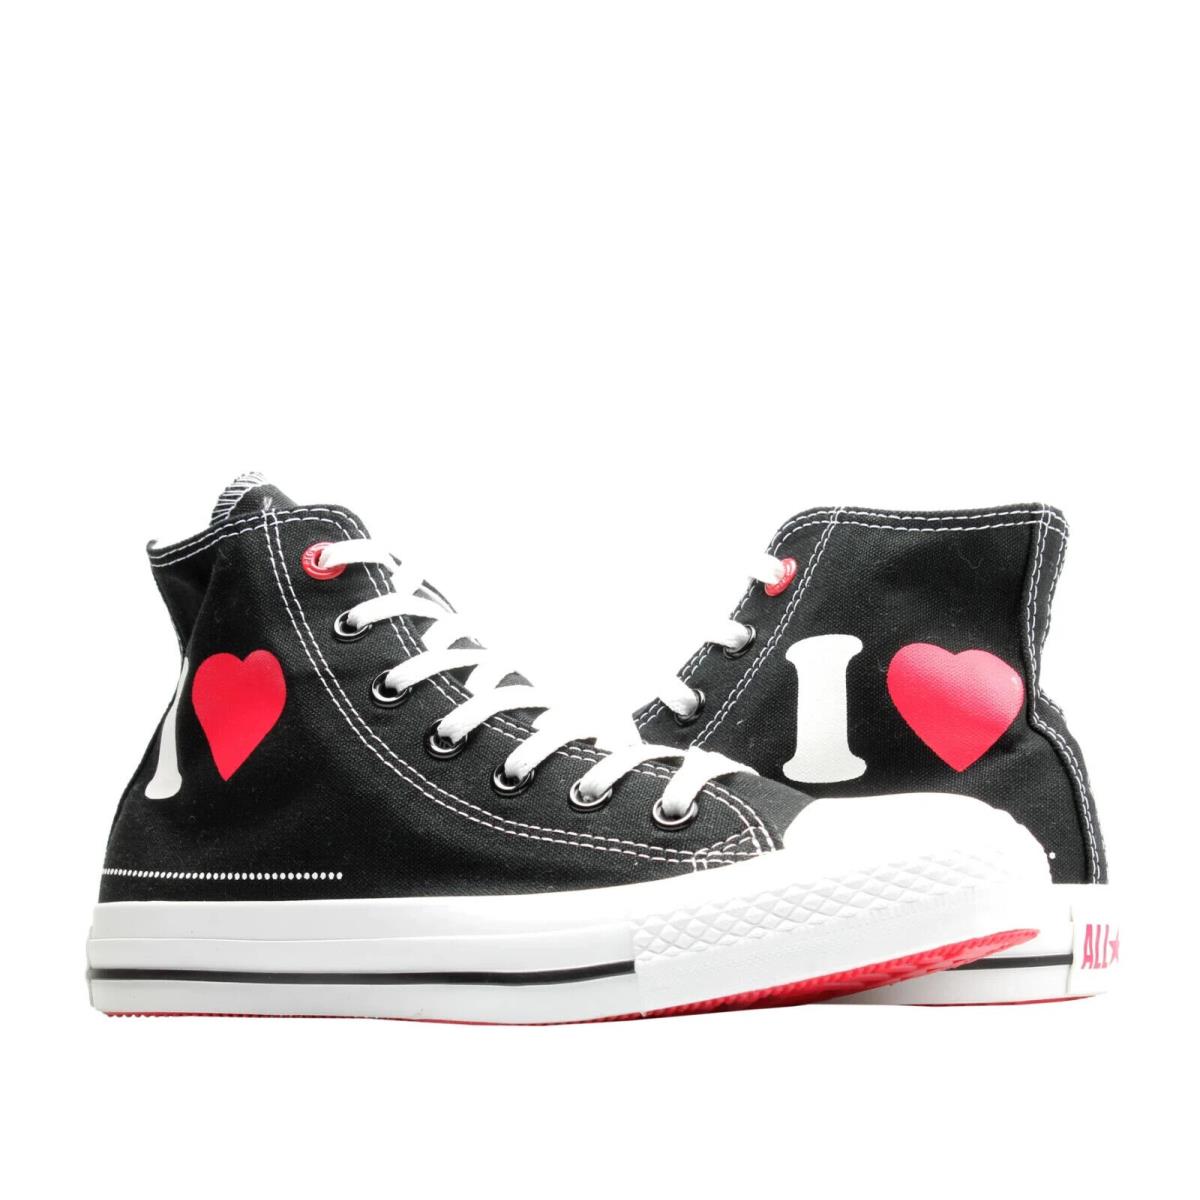 Converse Chuck Taylor All Star Men`s Black Red I Love High Top Sneaker US 8 HO53